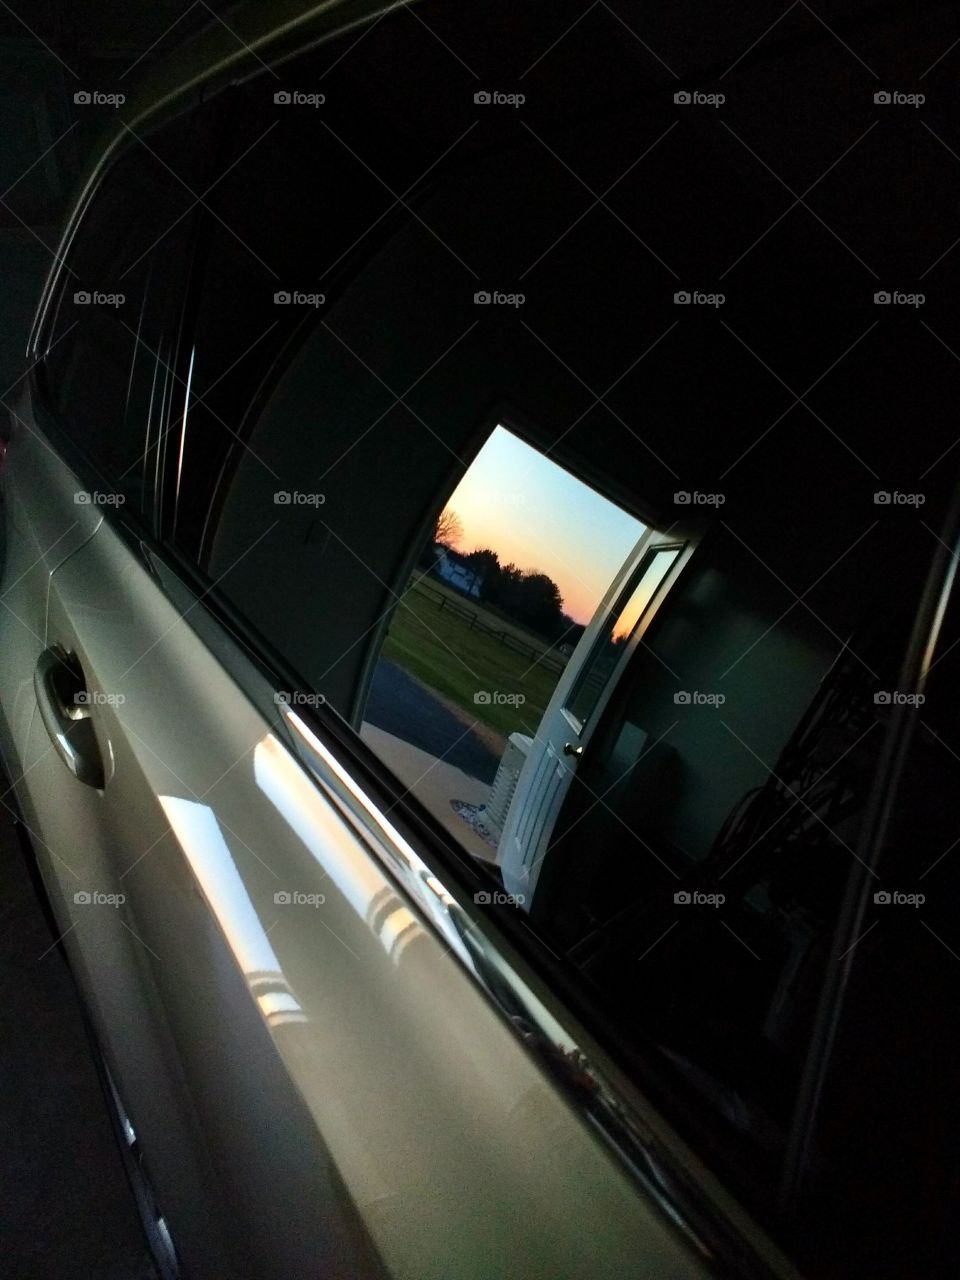 sunset through a doorway reflected in a car window in a garage